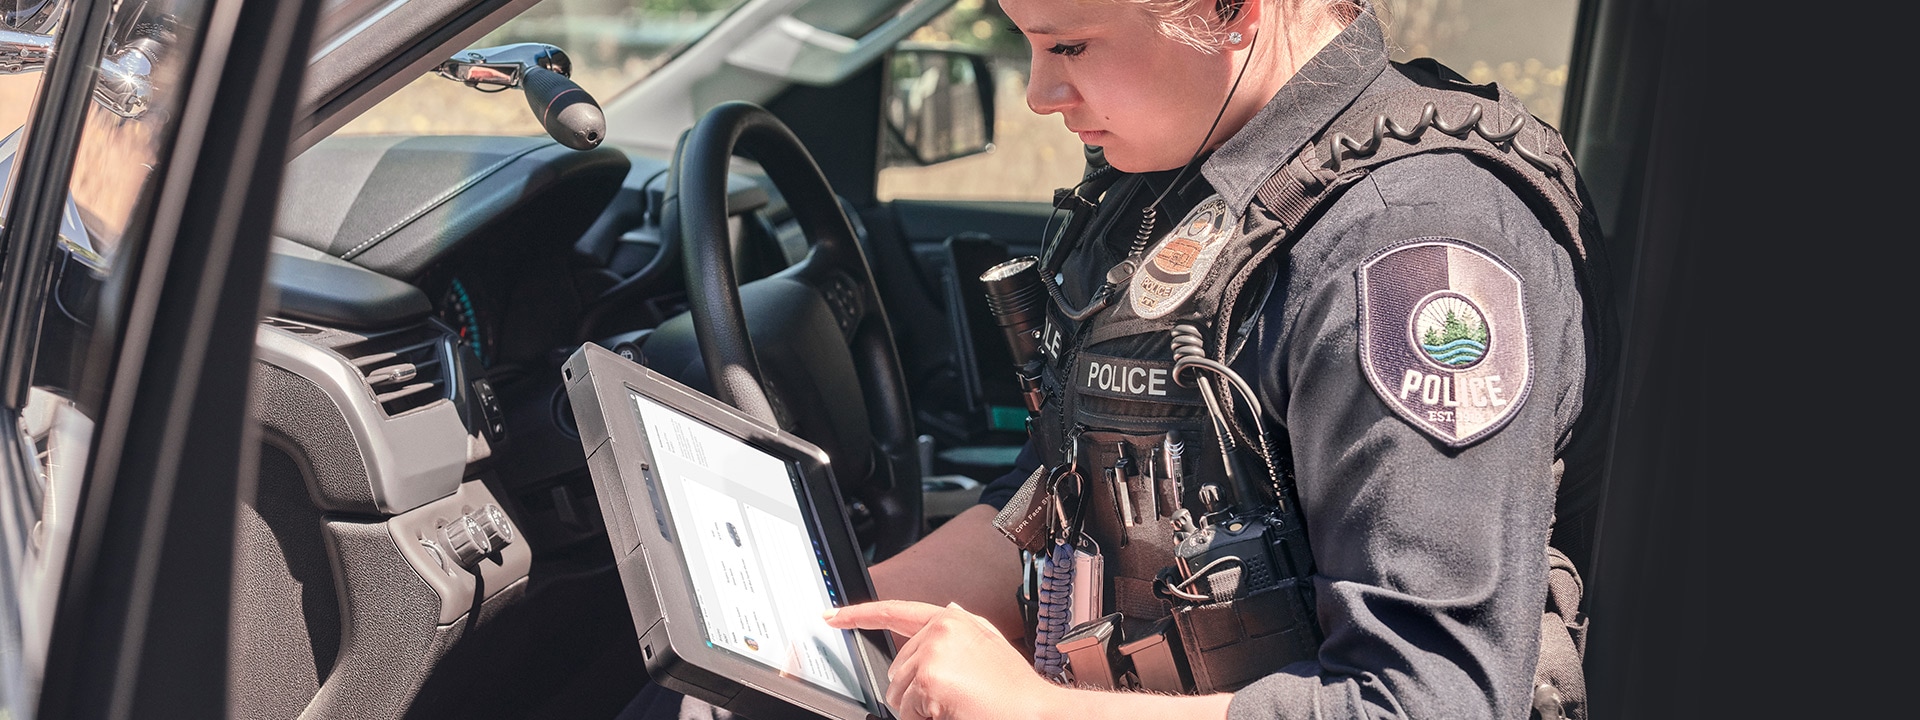 A policewoman is seen sitting in the passenger seat of her patrol car while using a Surface Pro device